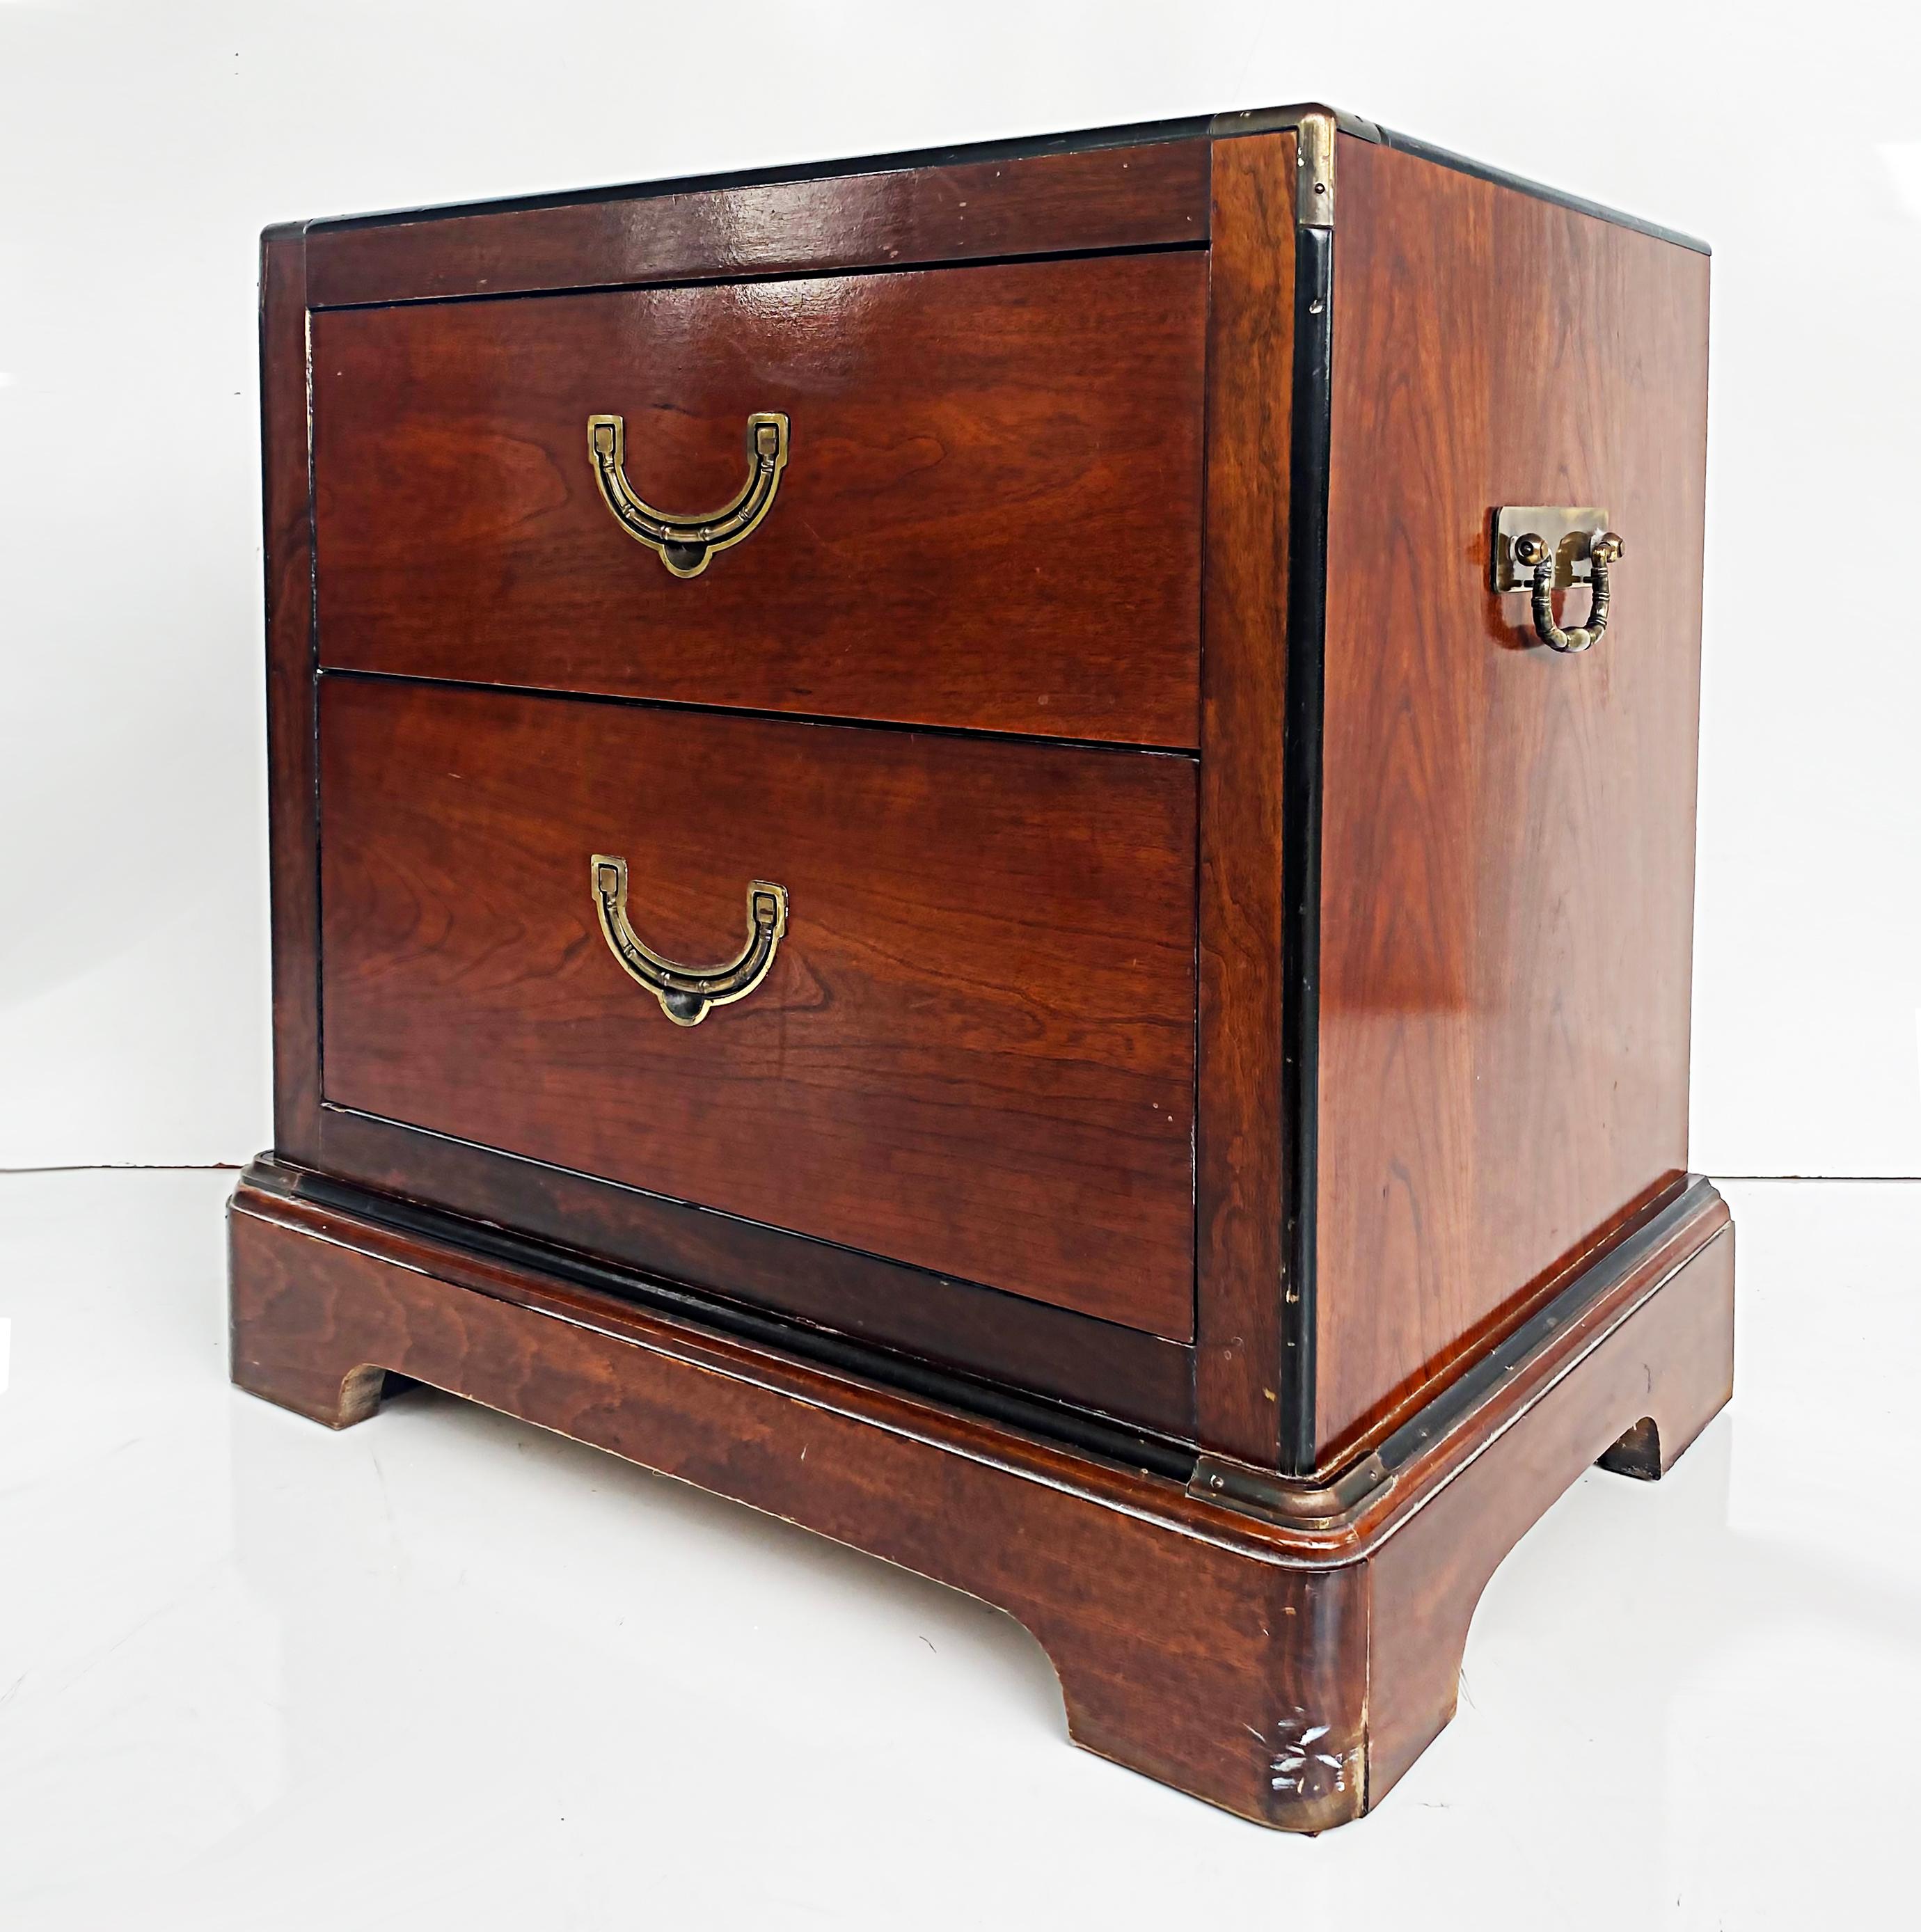 National Mt. Airy mahogany campaign style night stands with brass hardware, pair.

Offered for sale is a pair of Mahogany campaign-style chests or night-stands manufactured by the National Mt. Airy Furniture Company. The night-stands have faux